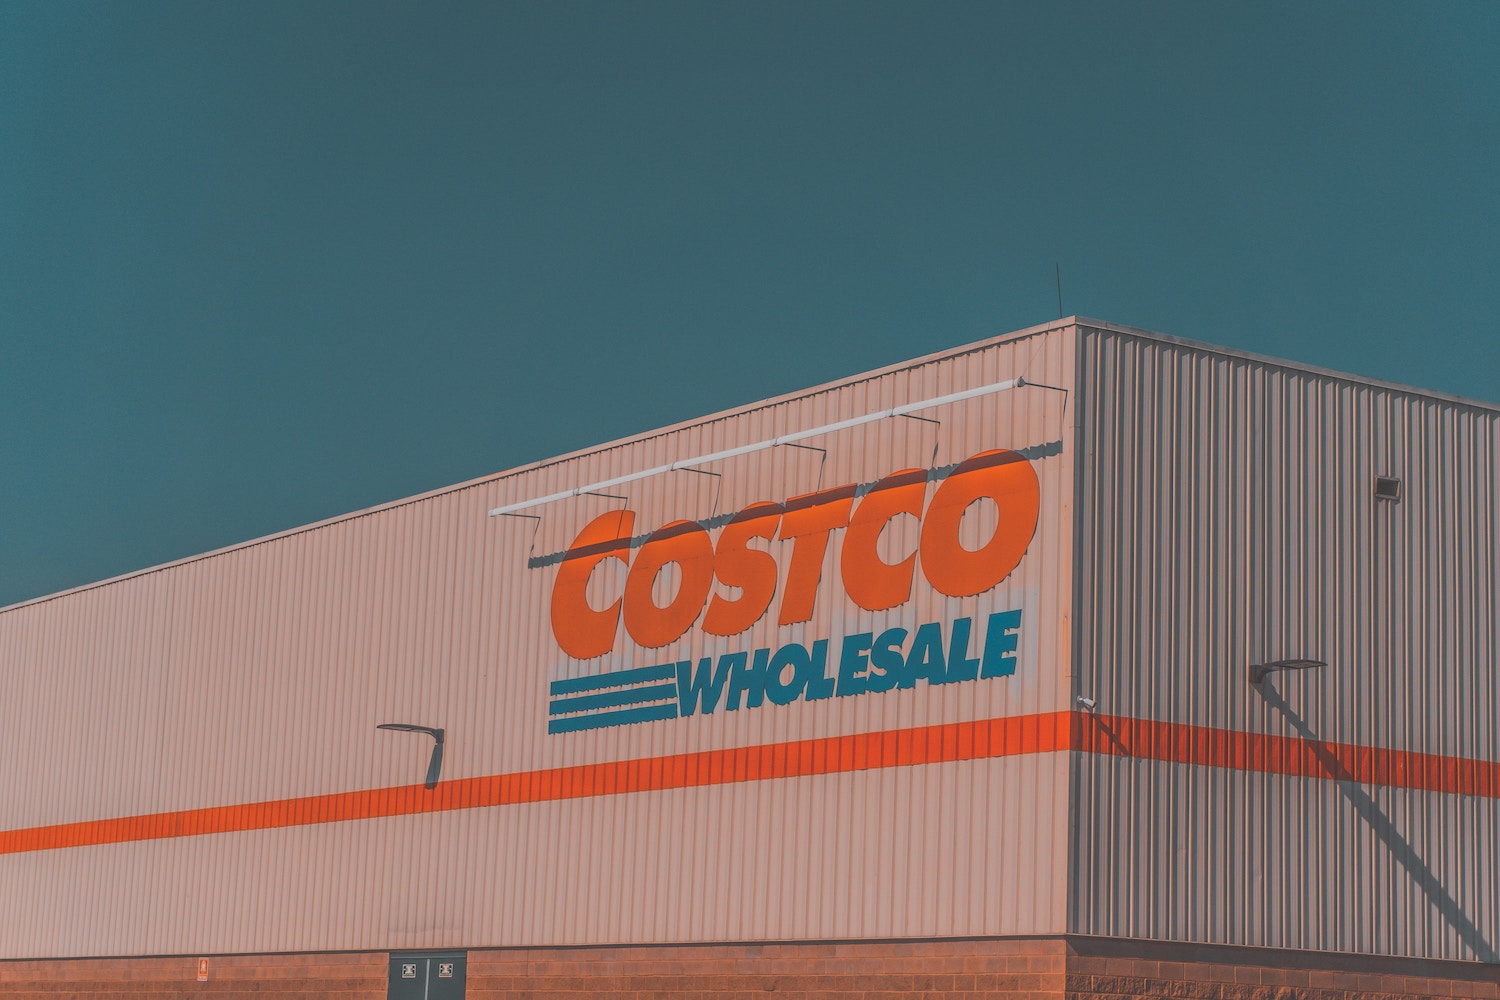 Costco's Q2 Earnings Mostly Beat Expectations, Shares Dip 2%